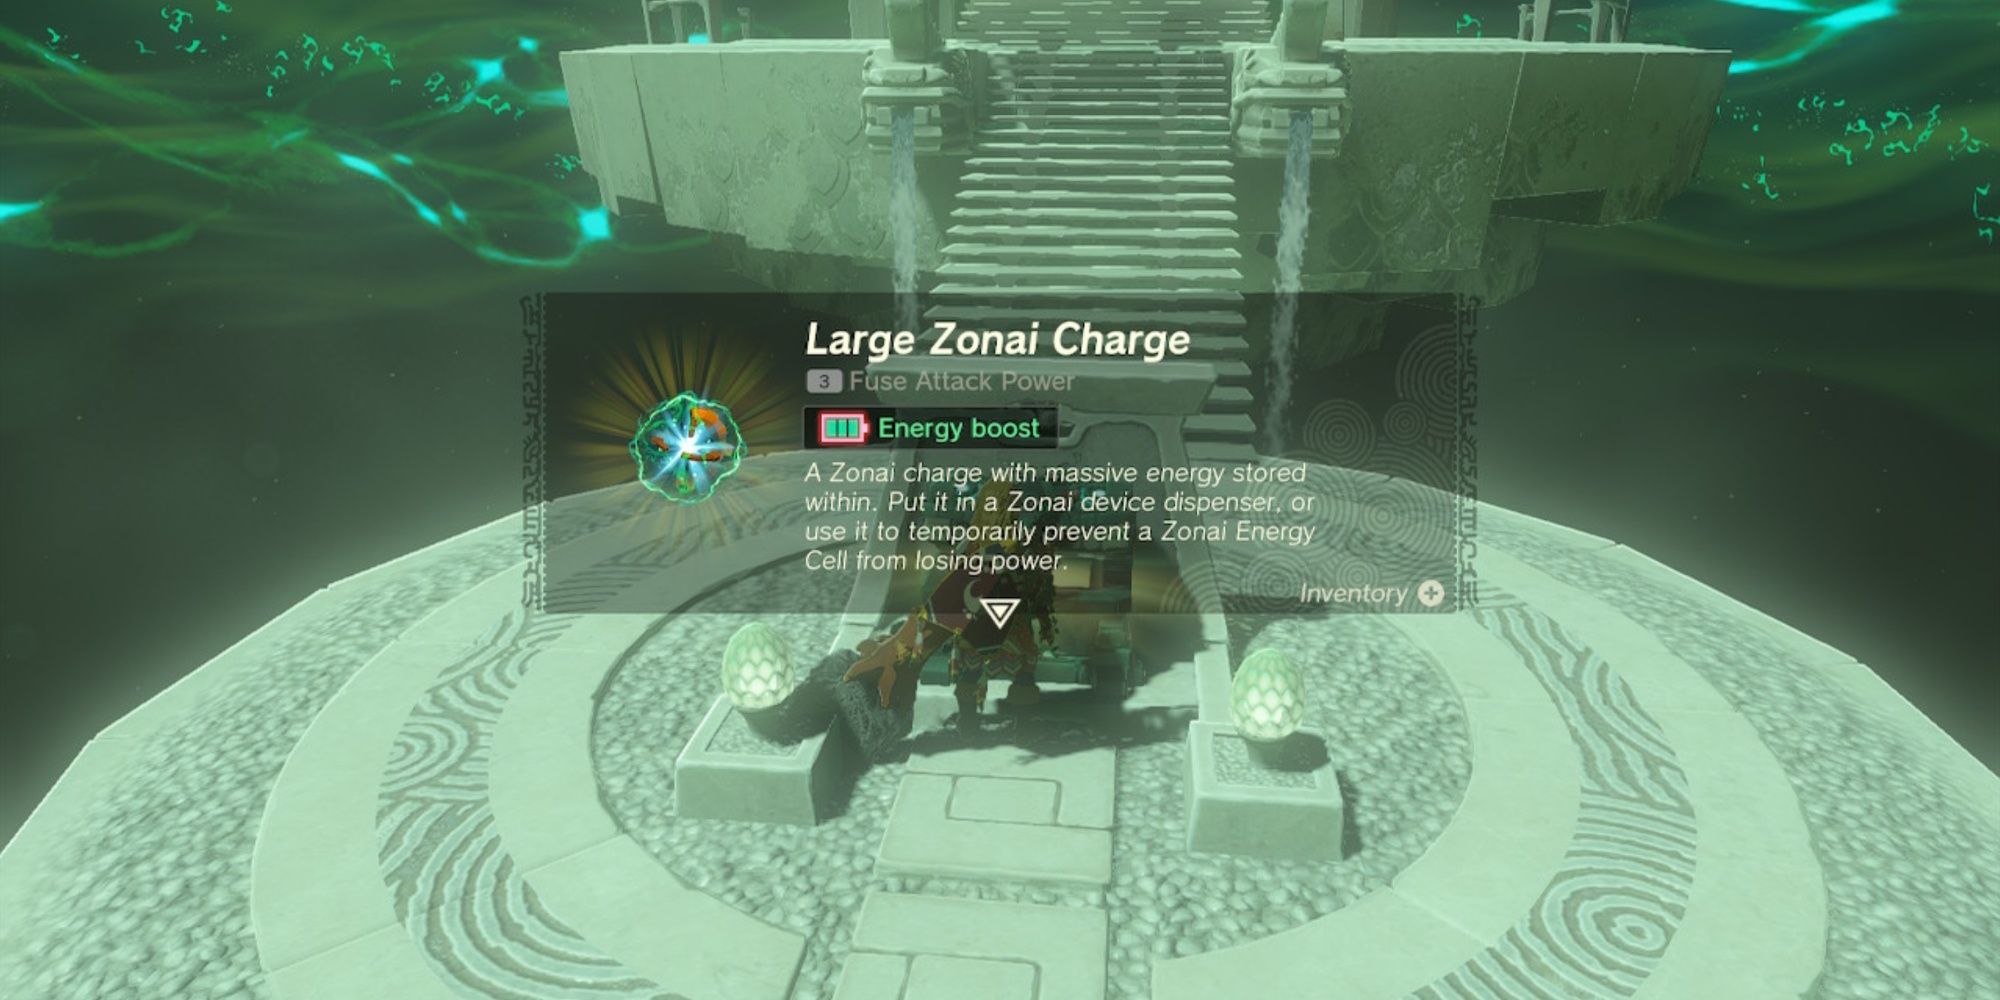 In The Legend of Zelda: Kingdom of Tears, Link opens the Takiihaban Shrine treasure chest and receives a Great Zonai Charge.